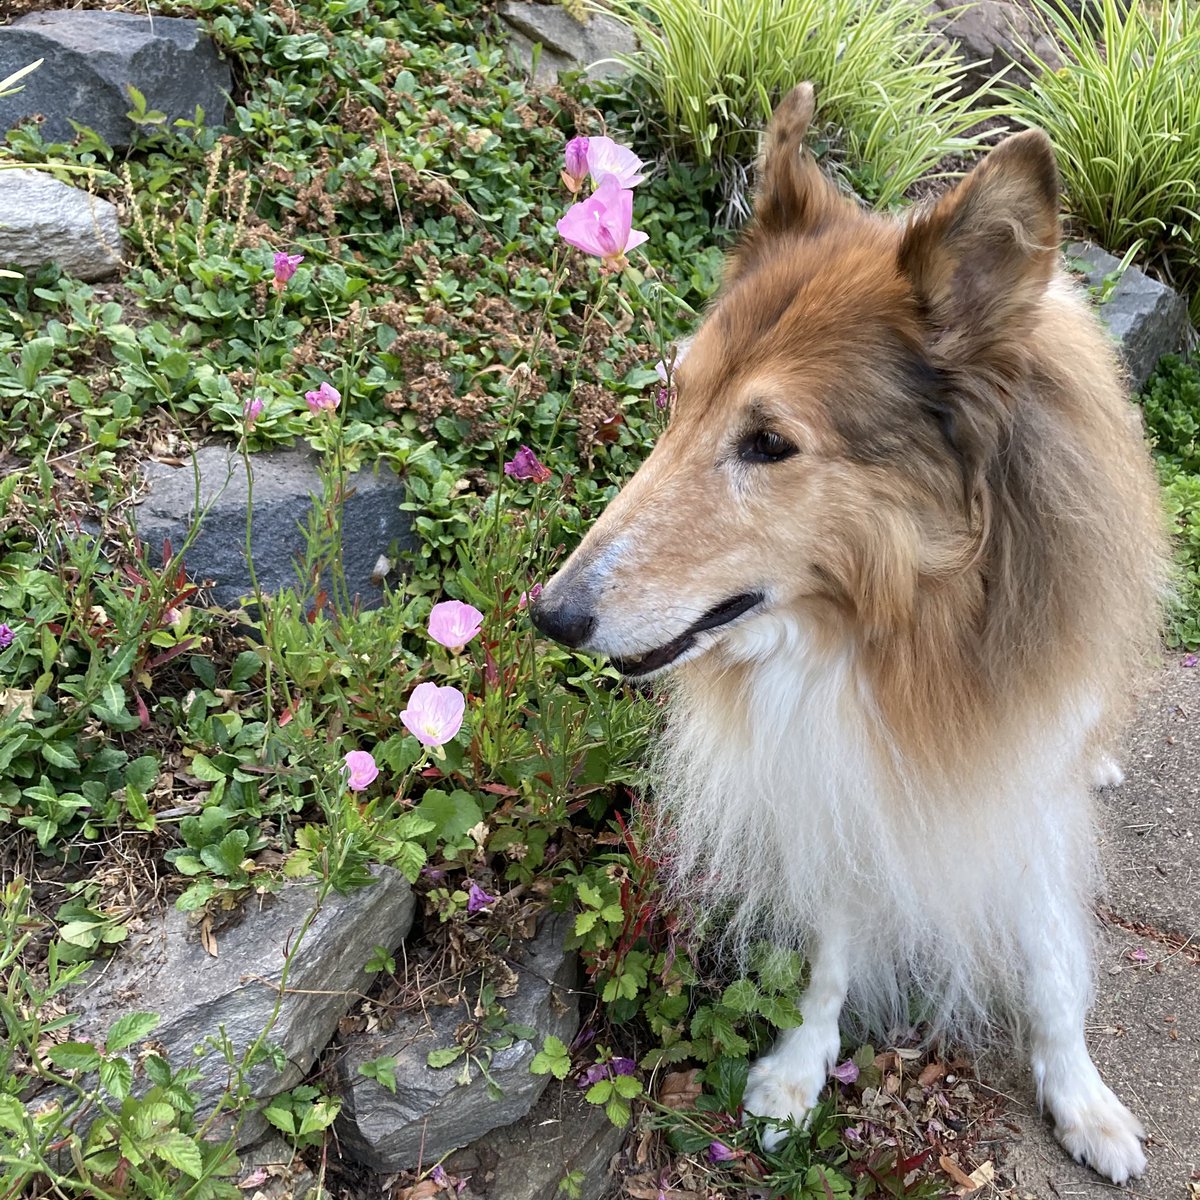 Up at dawn and felt good enough to walk around the block to check out the collie flowers and help deliver neighbors’ 📰 newspapers to front doors 🚪 

#pinkladyflowers #pinkladiesflowers #collieflower #seniordog #roughcollie #collie